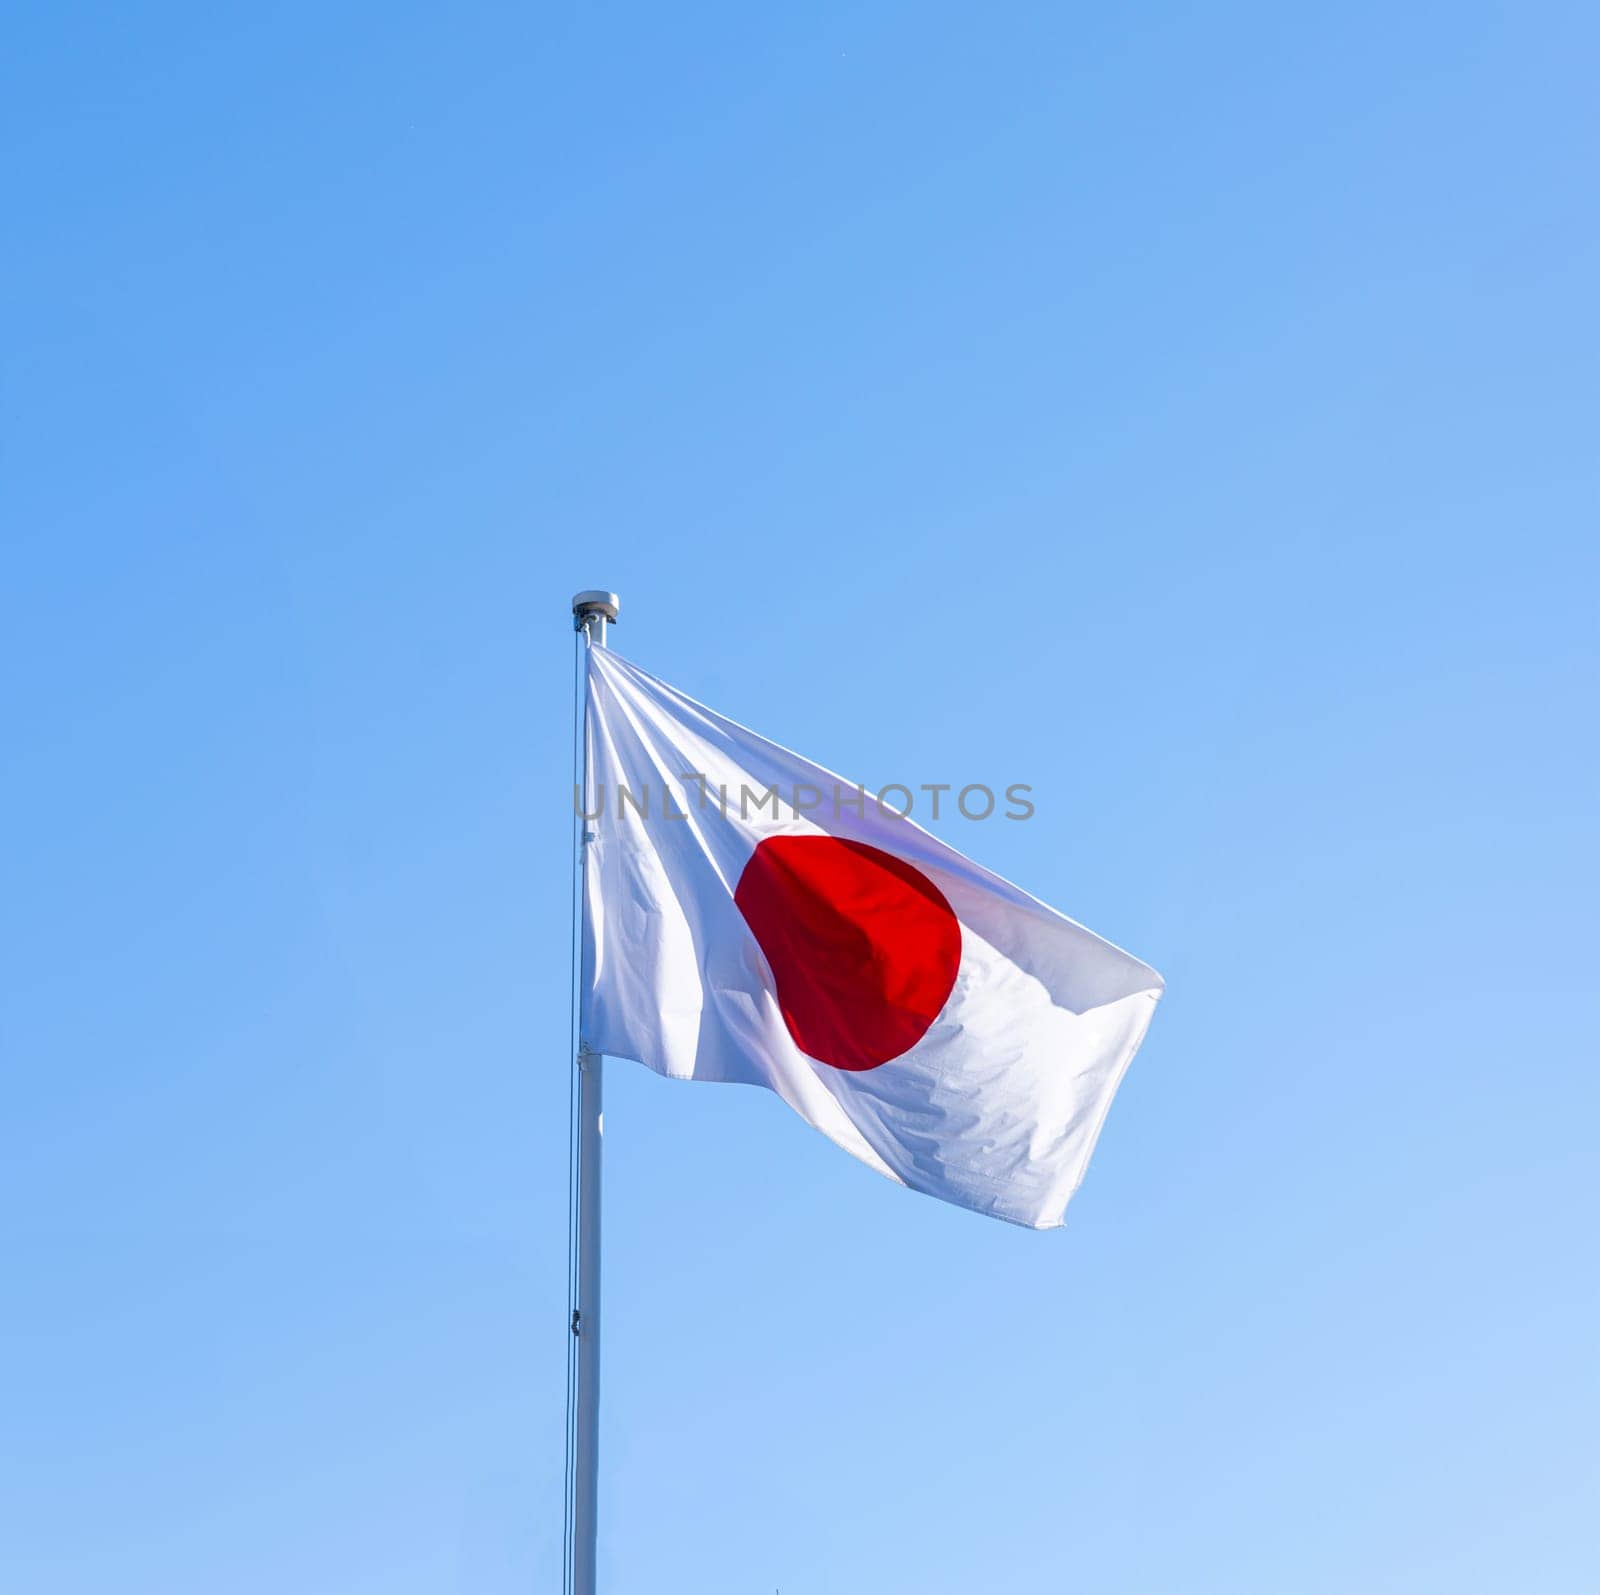 The Japanese flag with a blue sky on the background